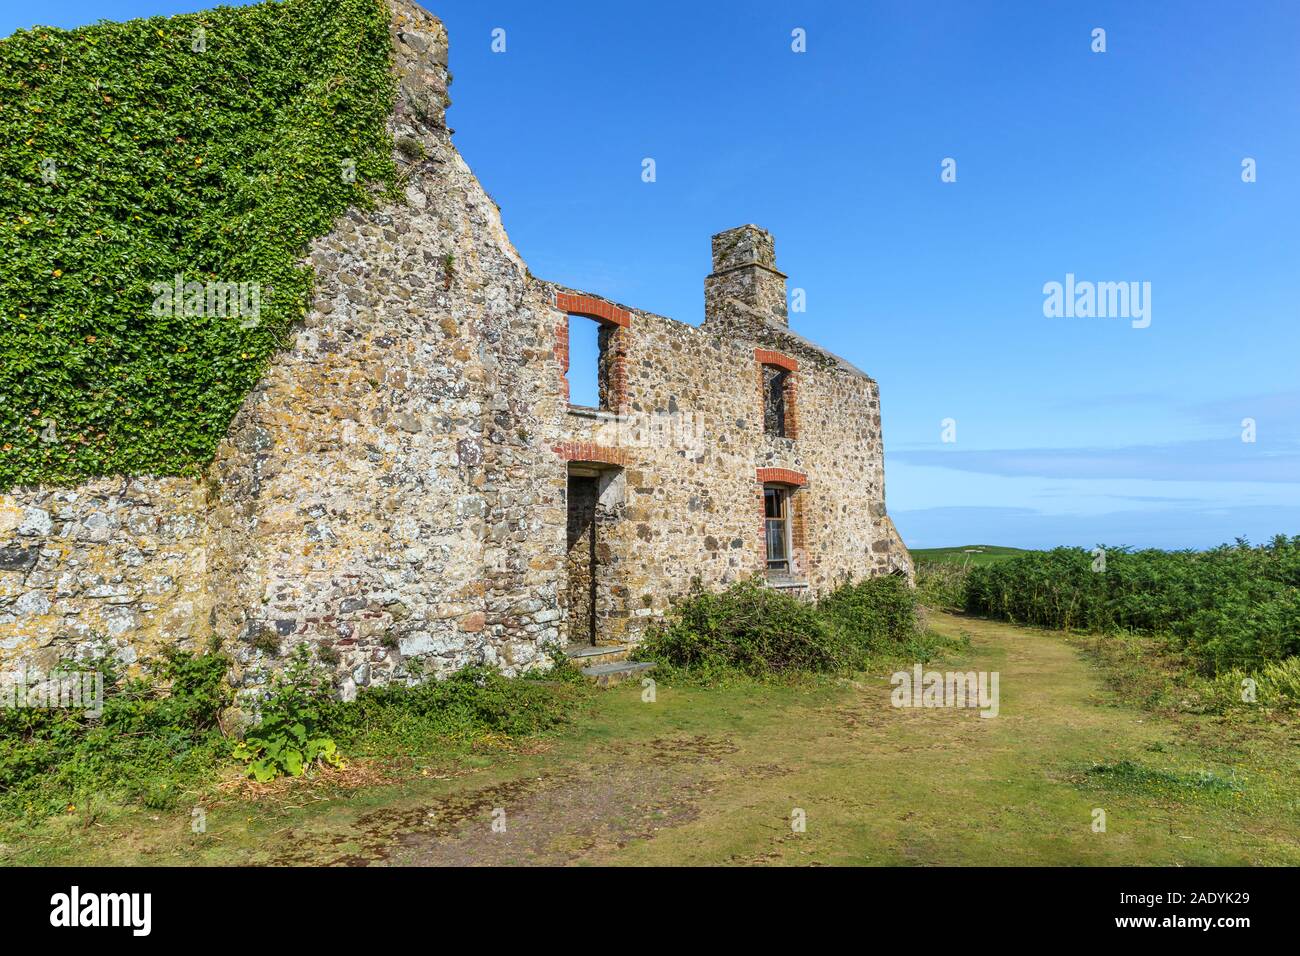 The ruins of the Old Farm used as hostel accomodation on Skomer Island on the Pembrokeshire coast, west Wales Stock Photo